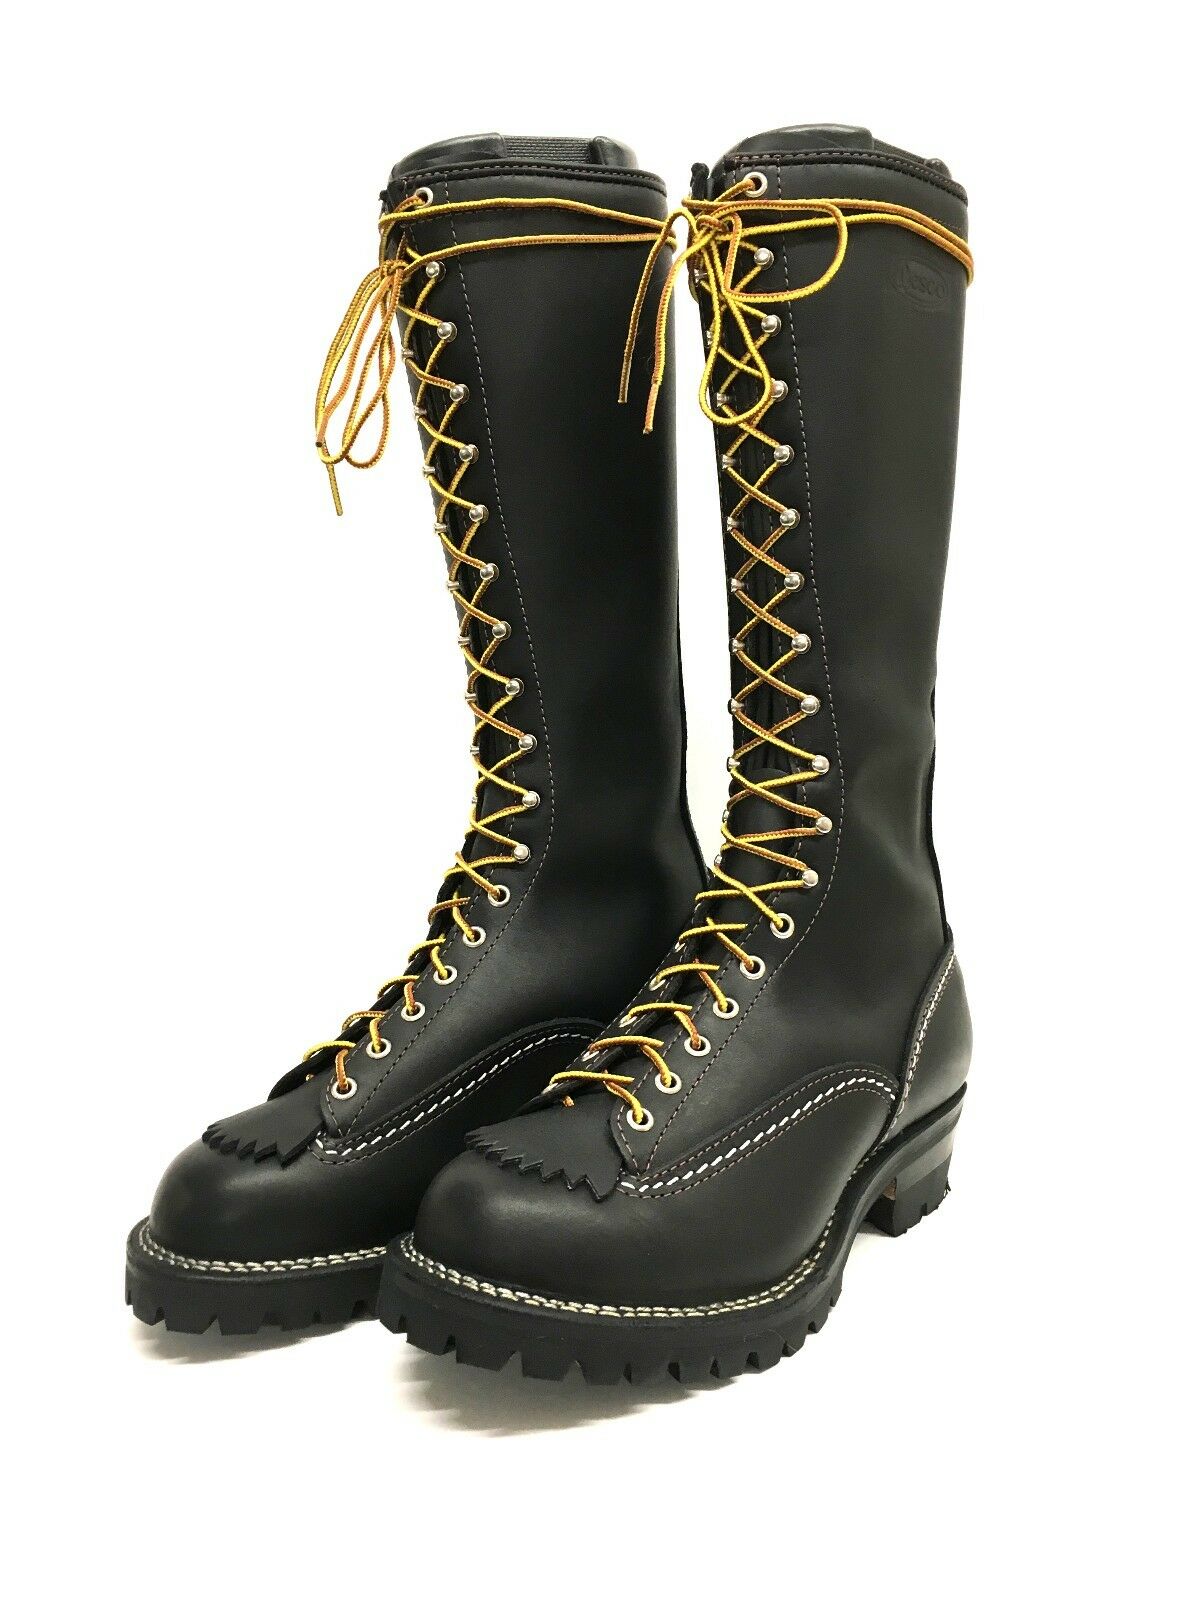 Jobmaster Lace-Up Boots